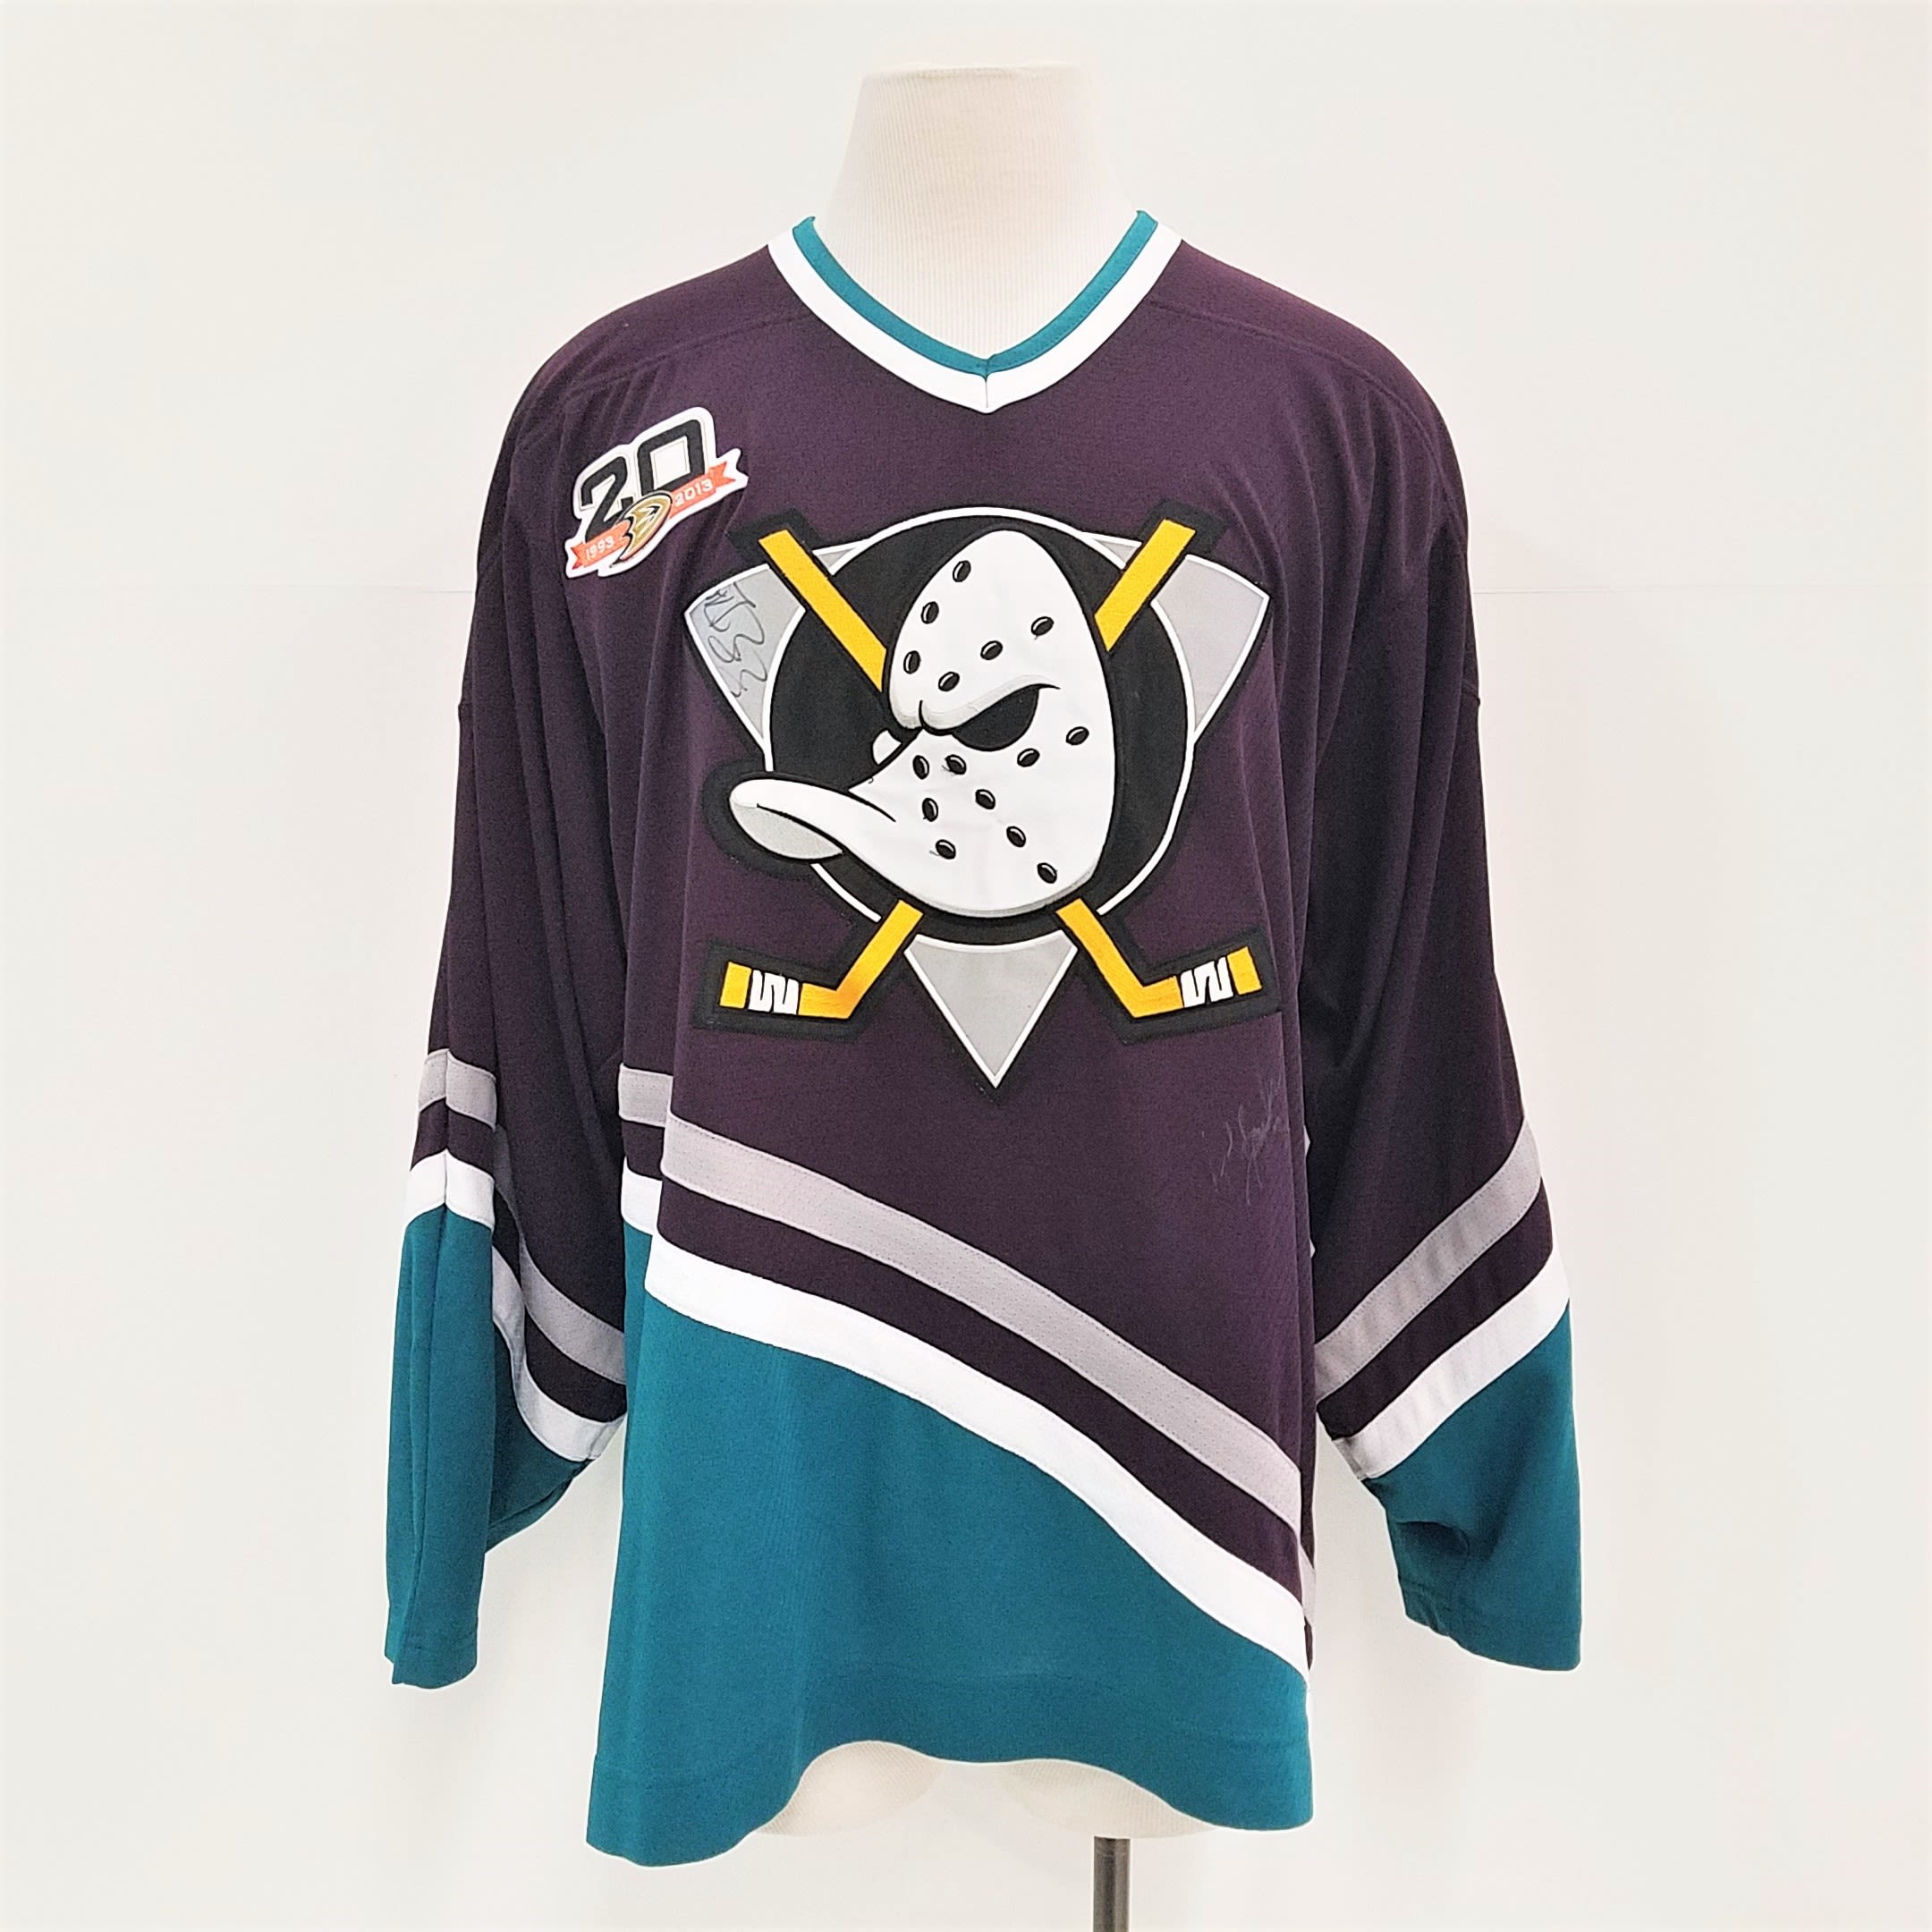 Adidas Anaheim Ducks Authentic NHL Jersey - Home - Adult